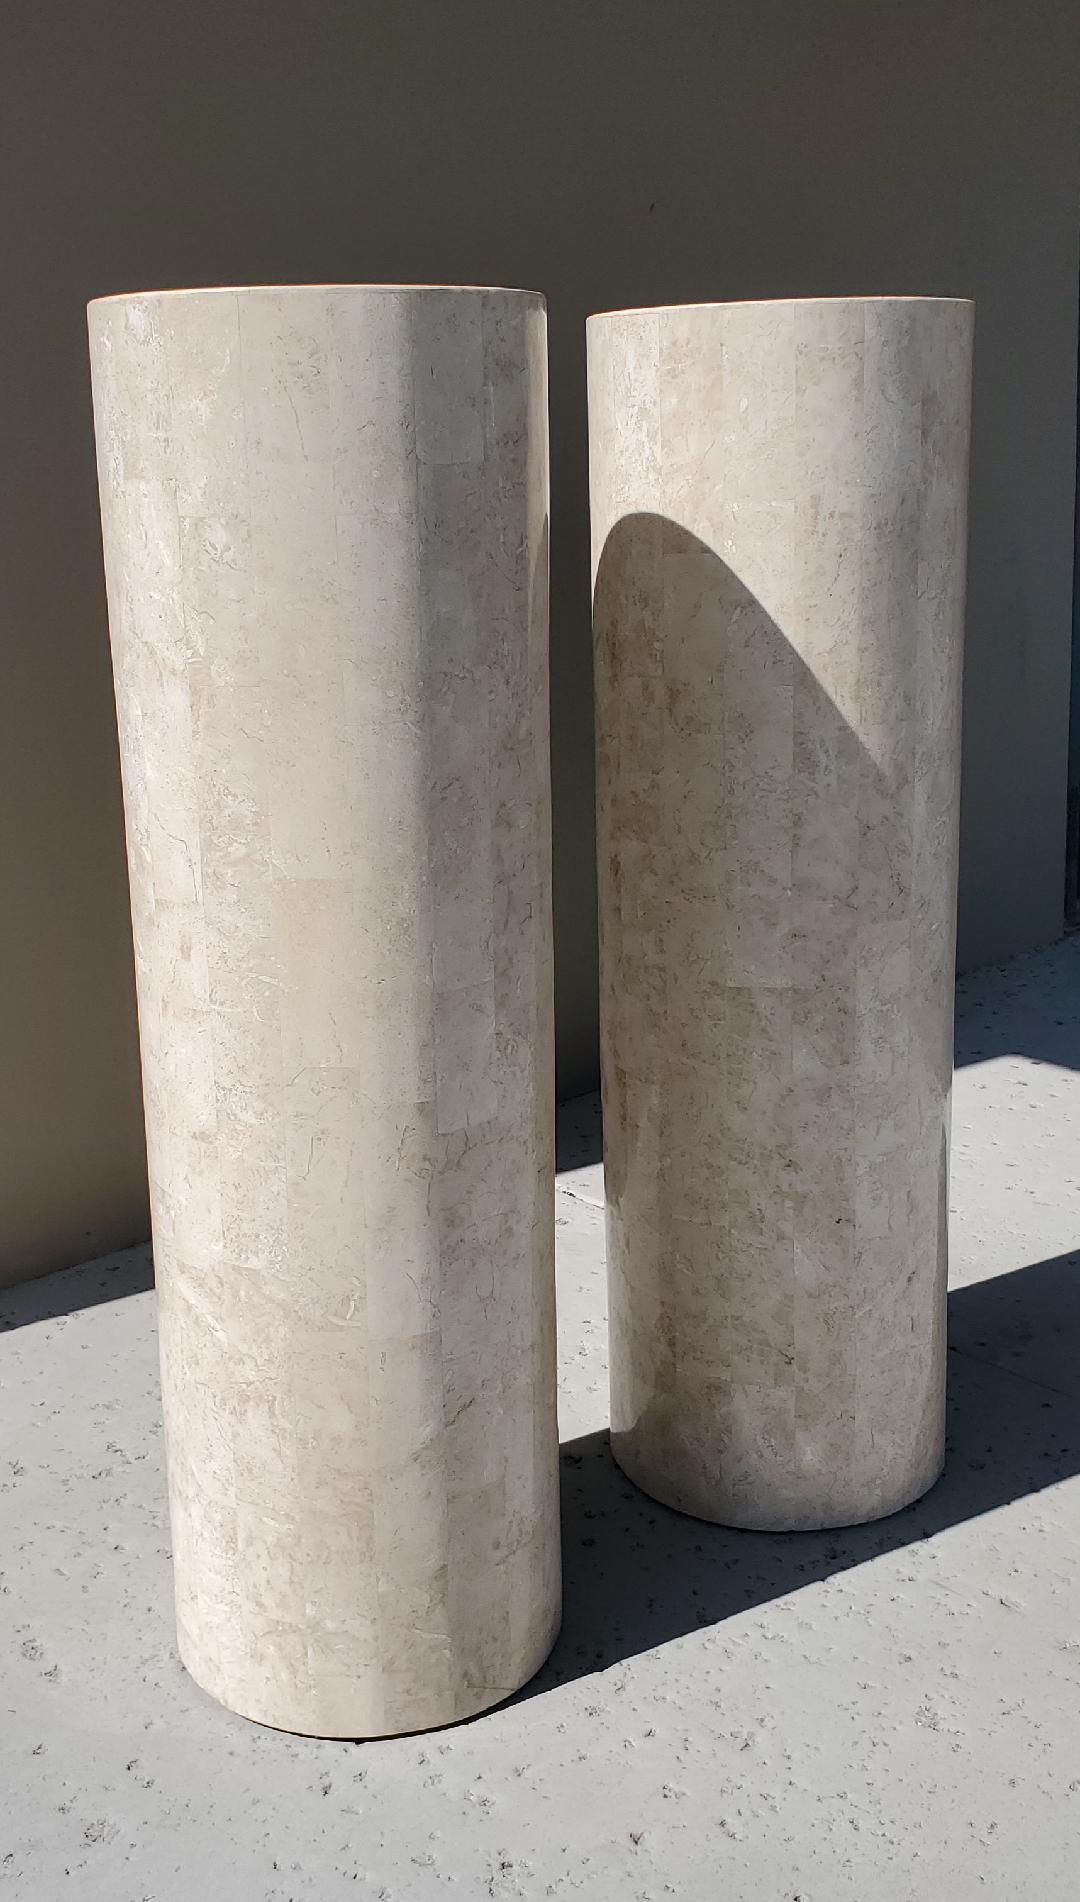 Marquis Collection of Beverly Hills, 1980s Round Tessellated Stone Pedestals 2 7